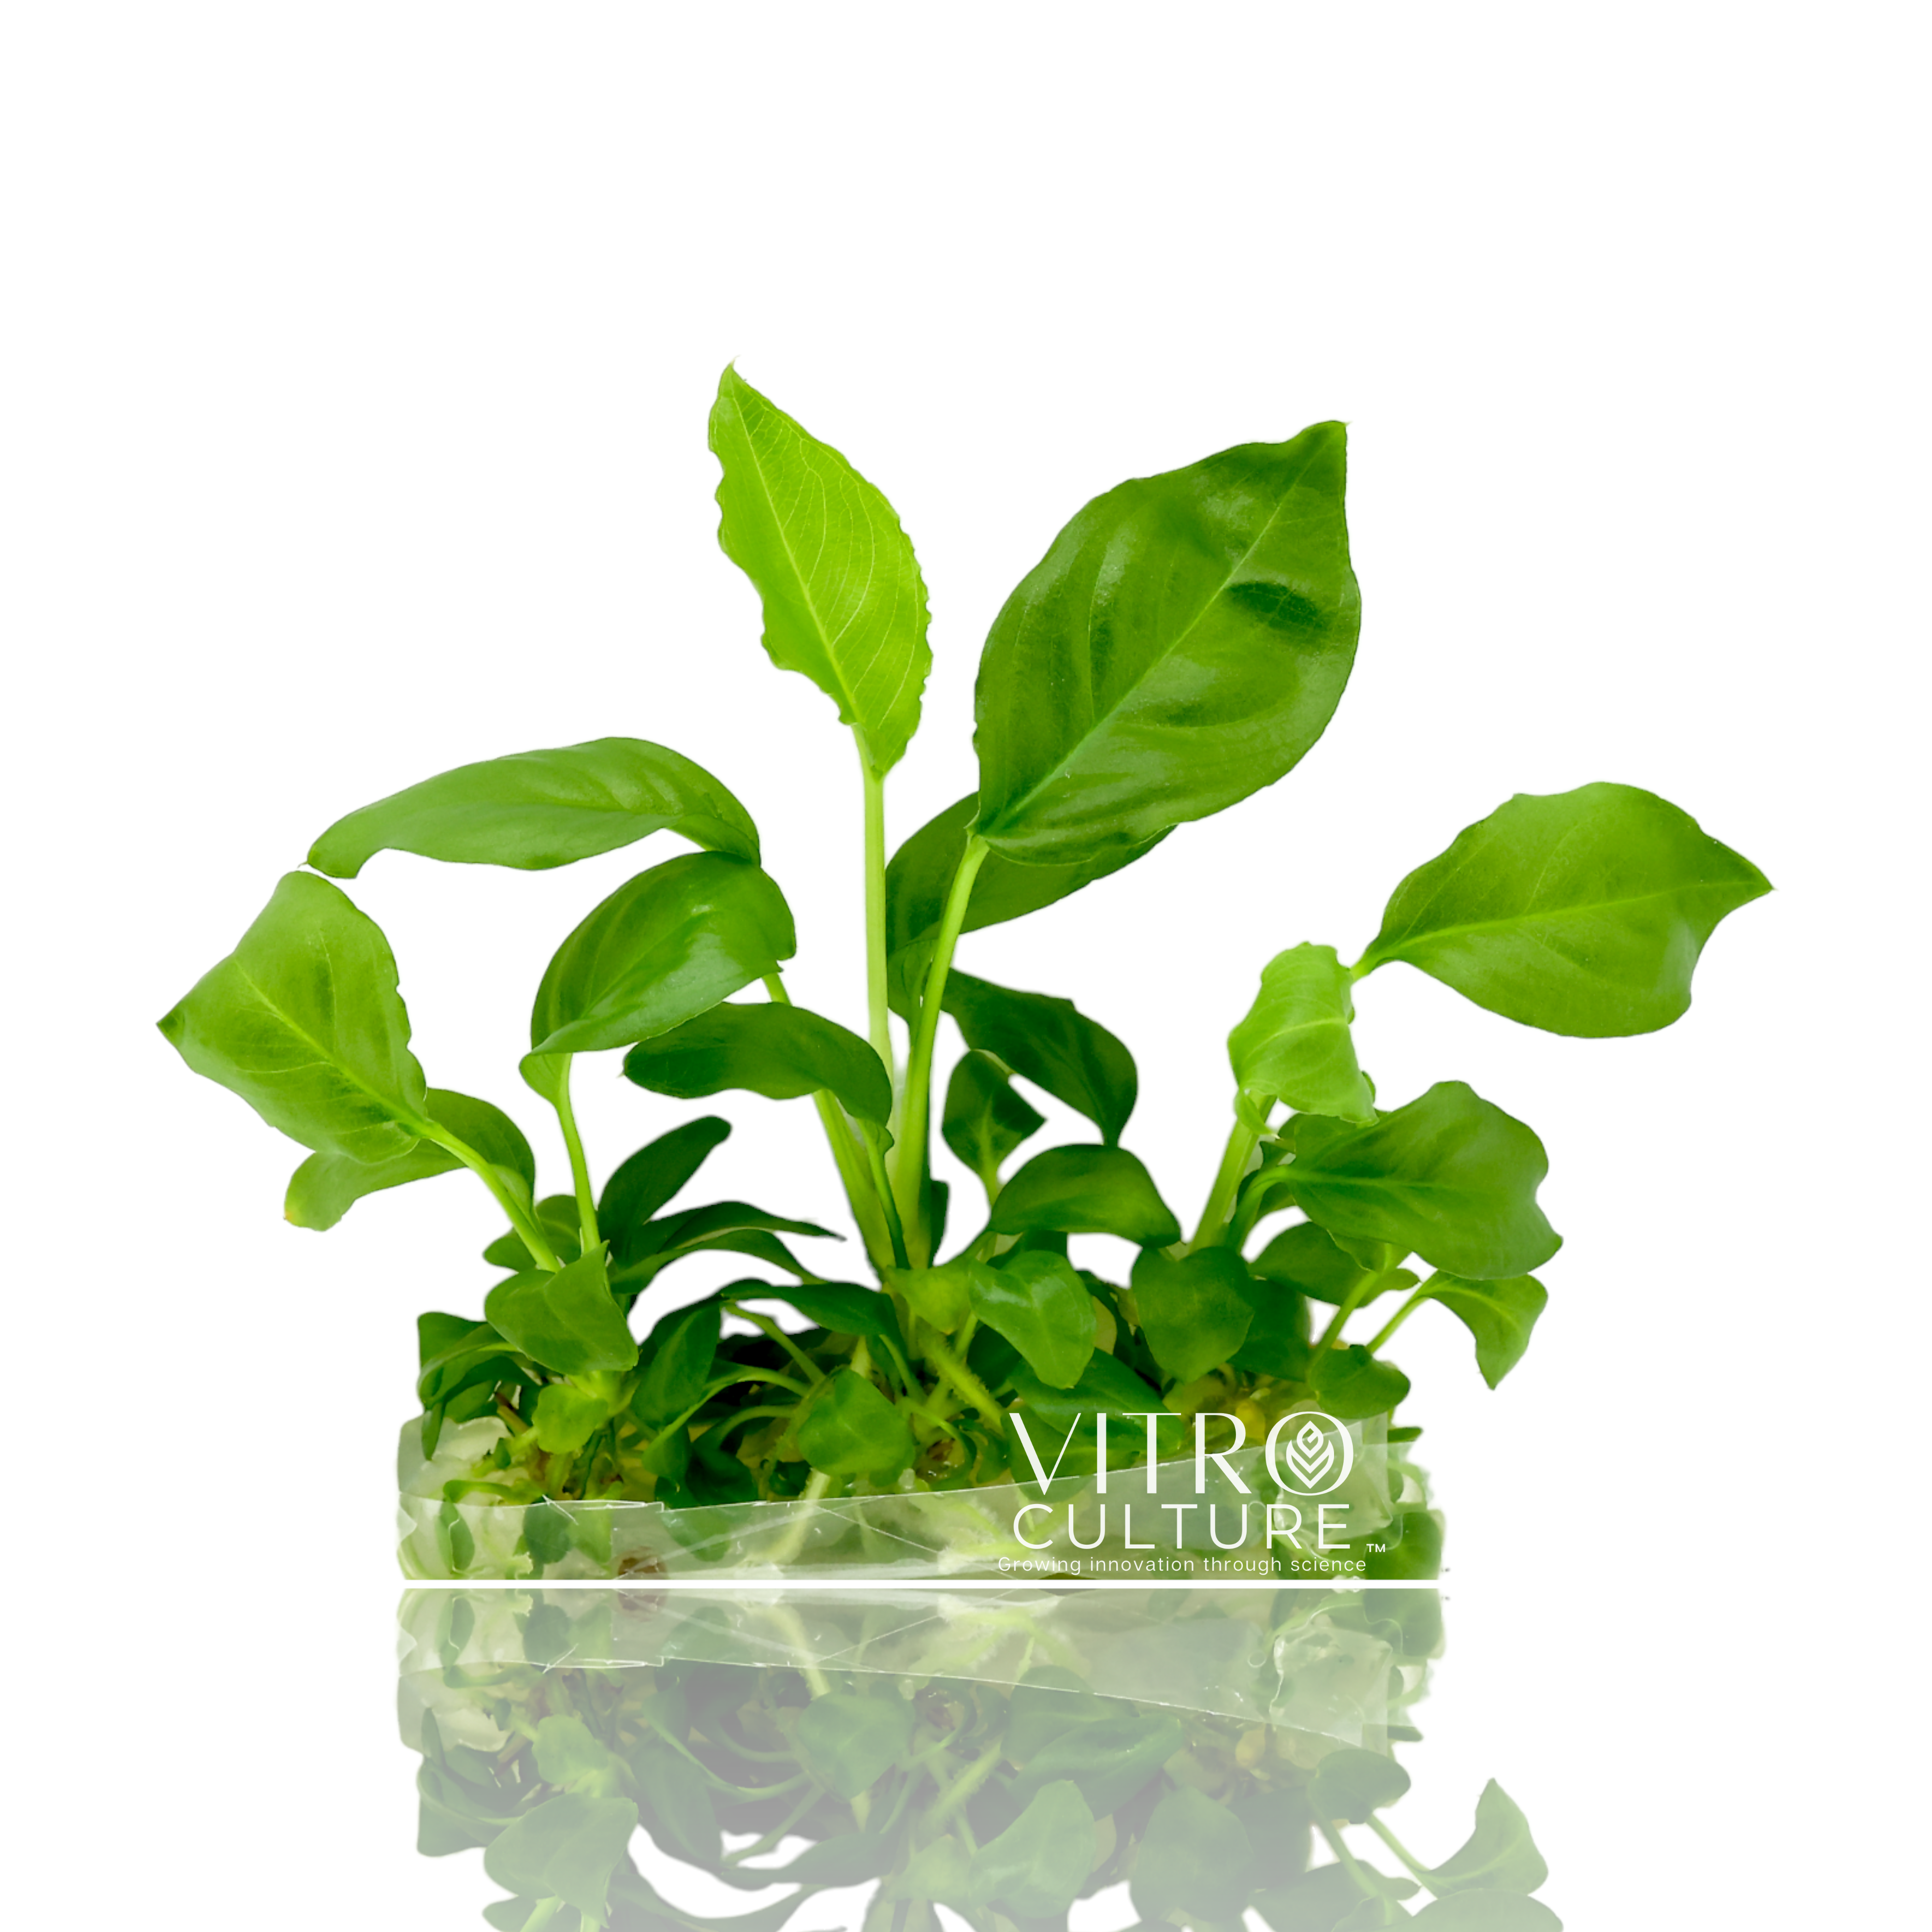 Anubias heterophylla Vitro Culture is a type of plant tissue culture that involves propagating Anubias heterophylla plants in a laboratory setting using sterile conditions. Anubias heterophylla is a species of aquatic plant that is native to West Africa and is commonly used in the aquarium hobby.